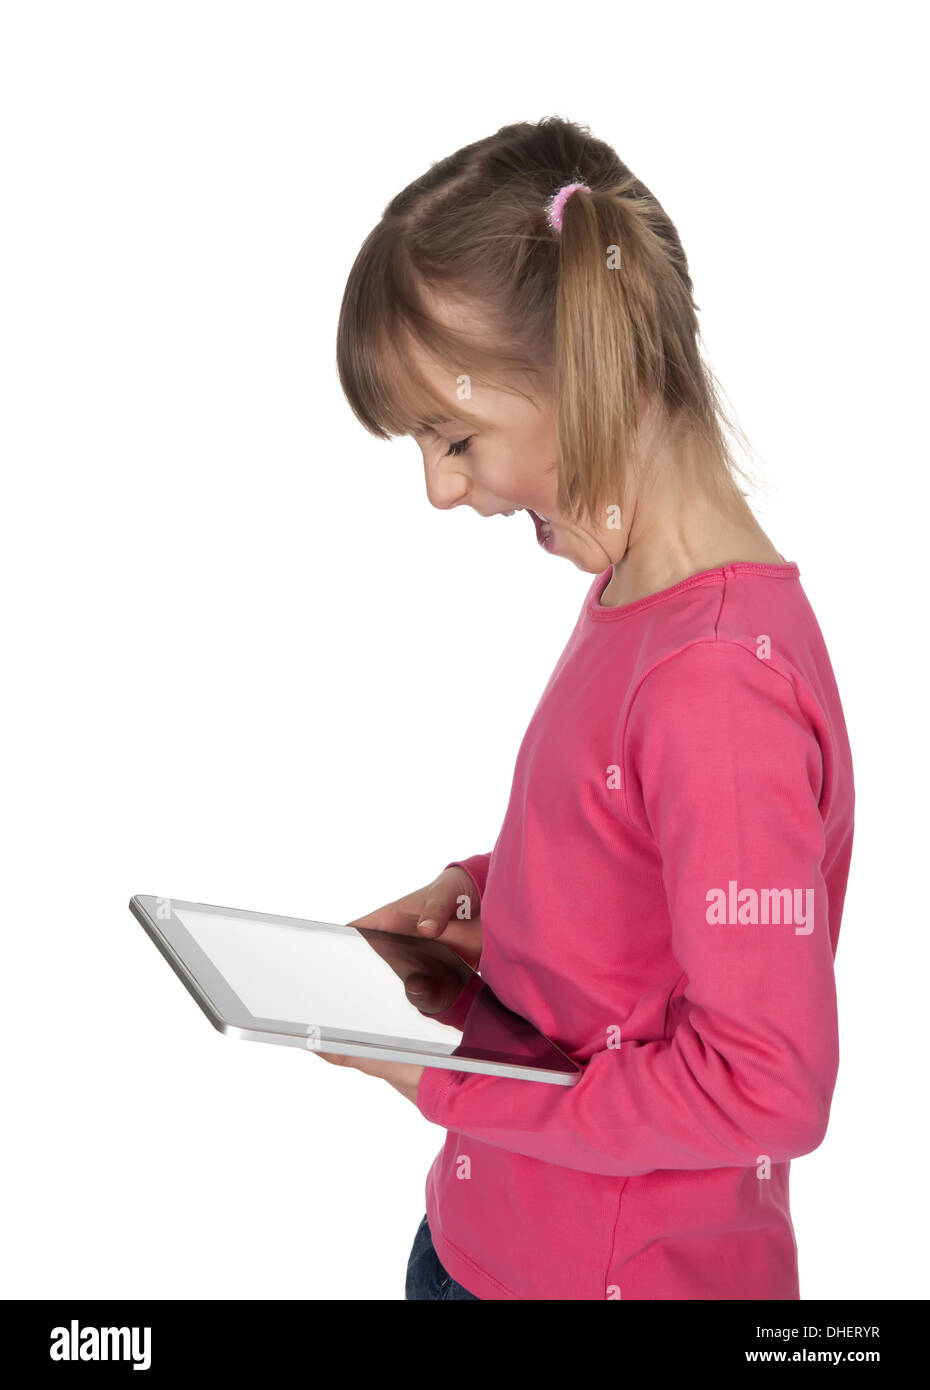 girl with digital tablet Stock Photo